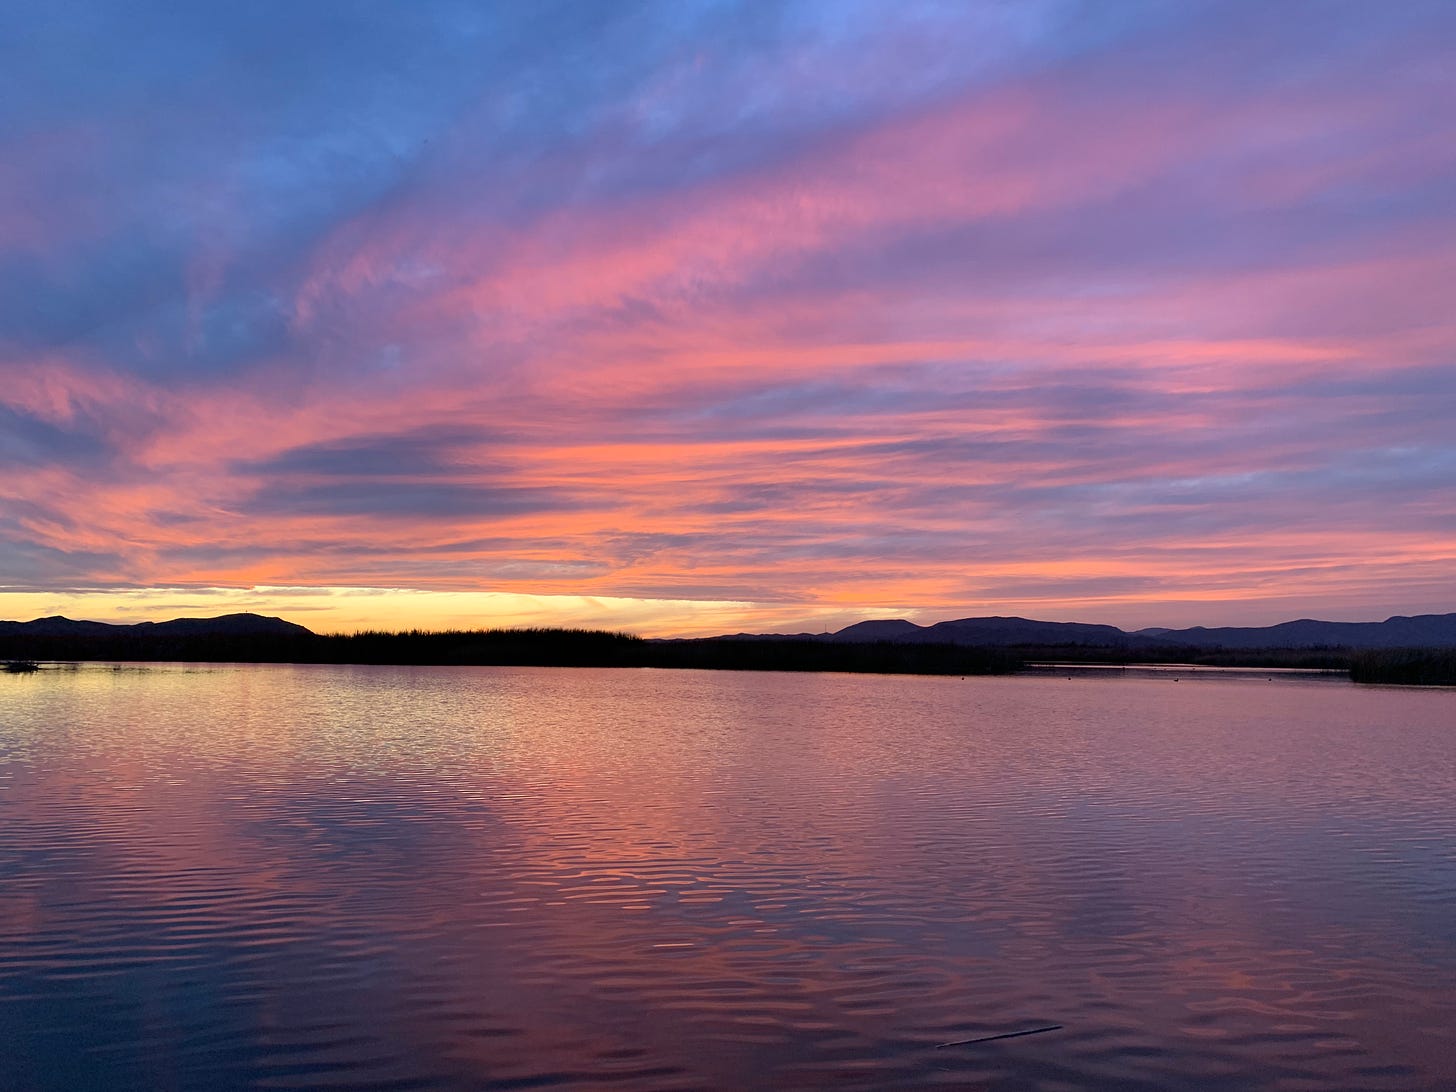 A sunset over a lake, with cloudy skies and a hue of purple, pink and blue